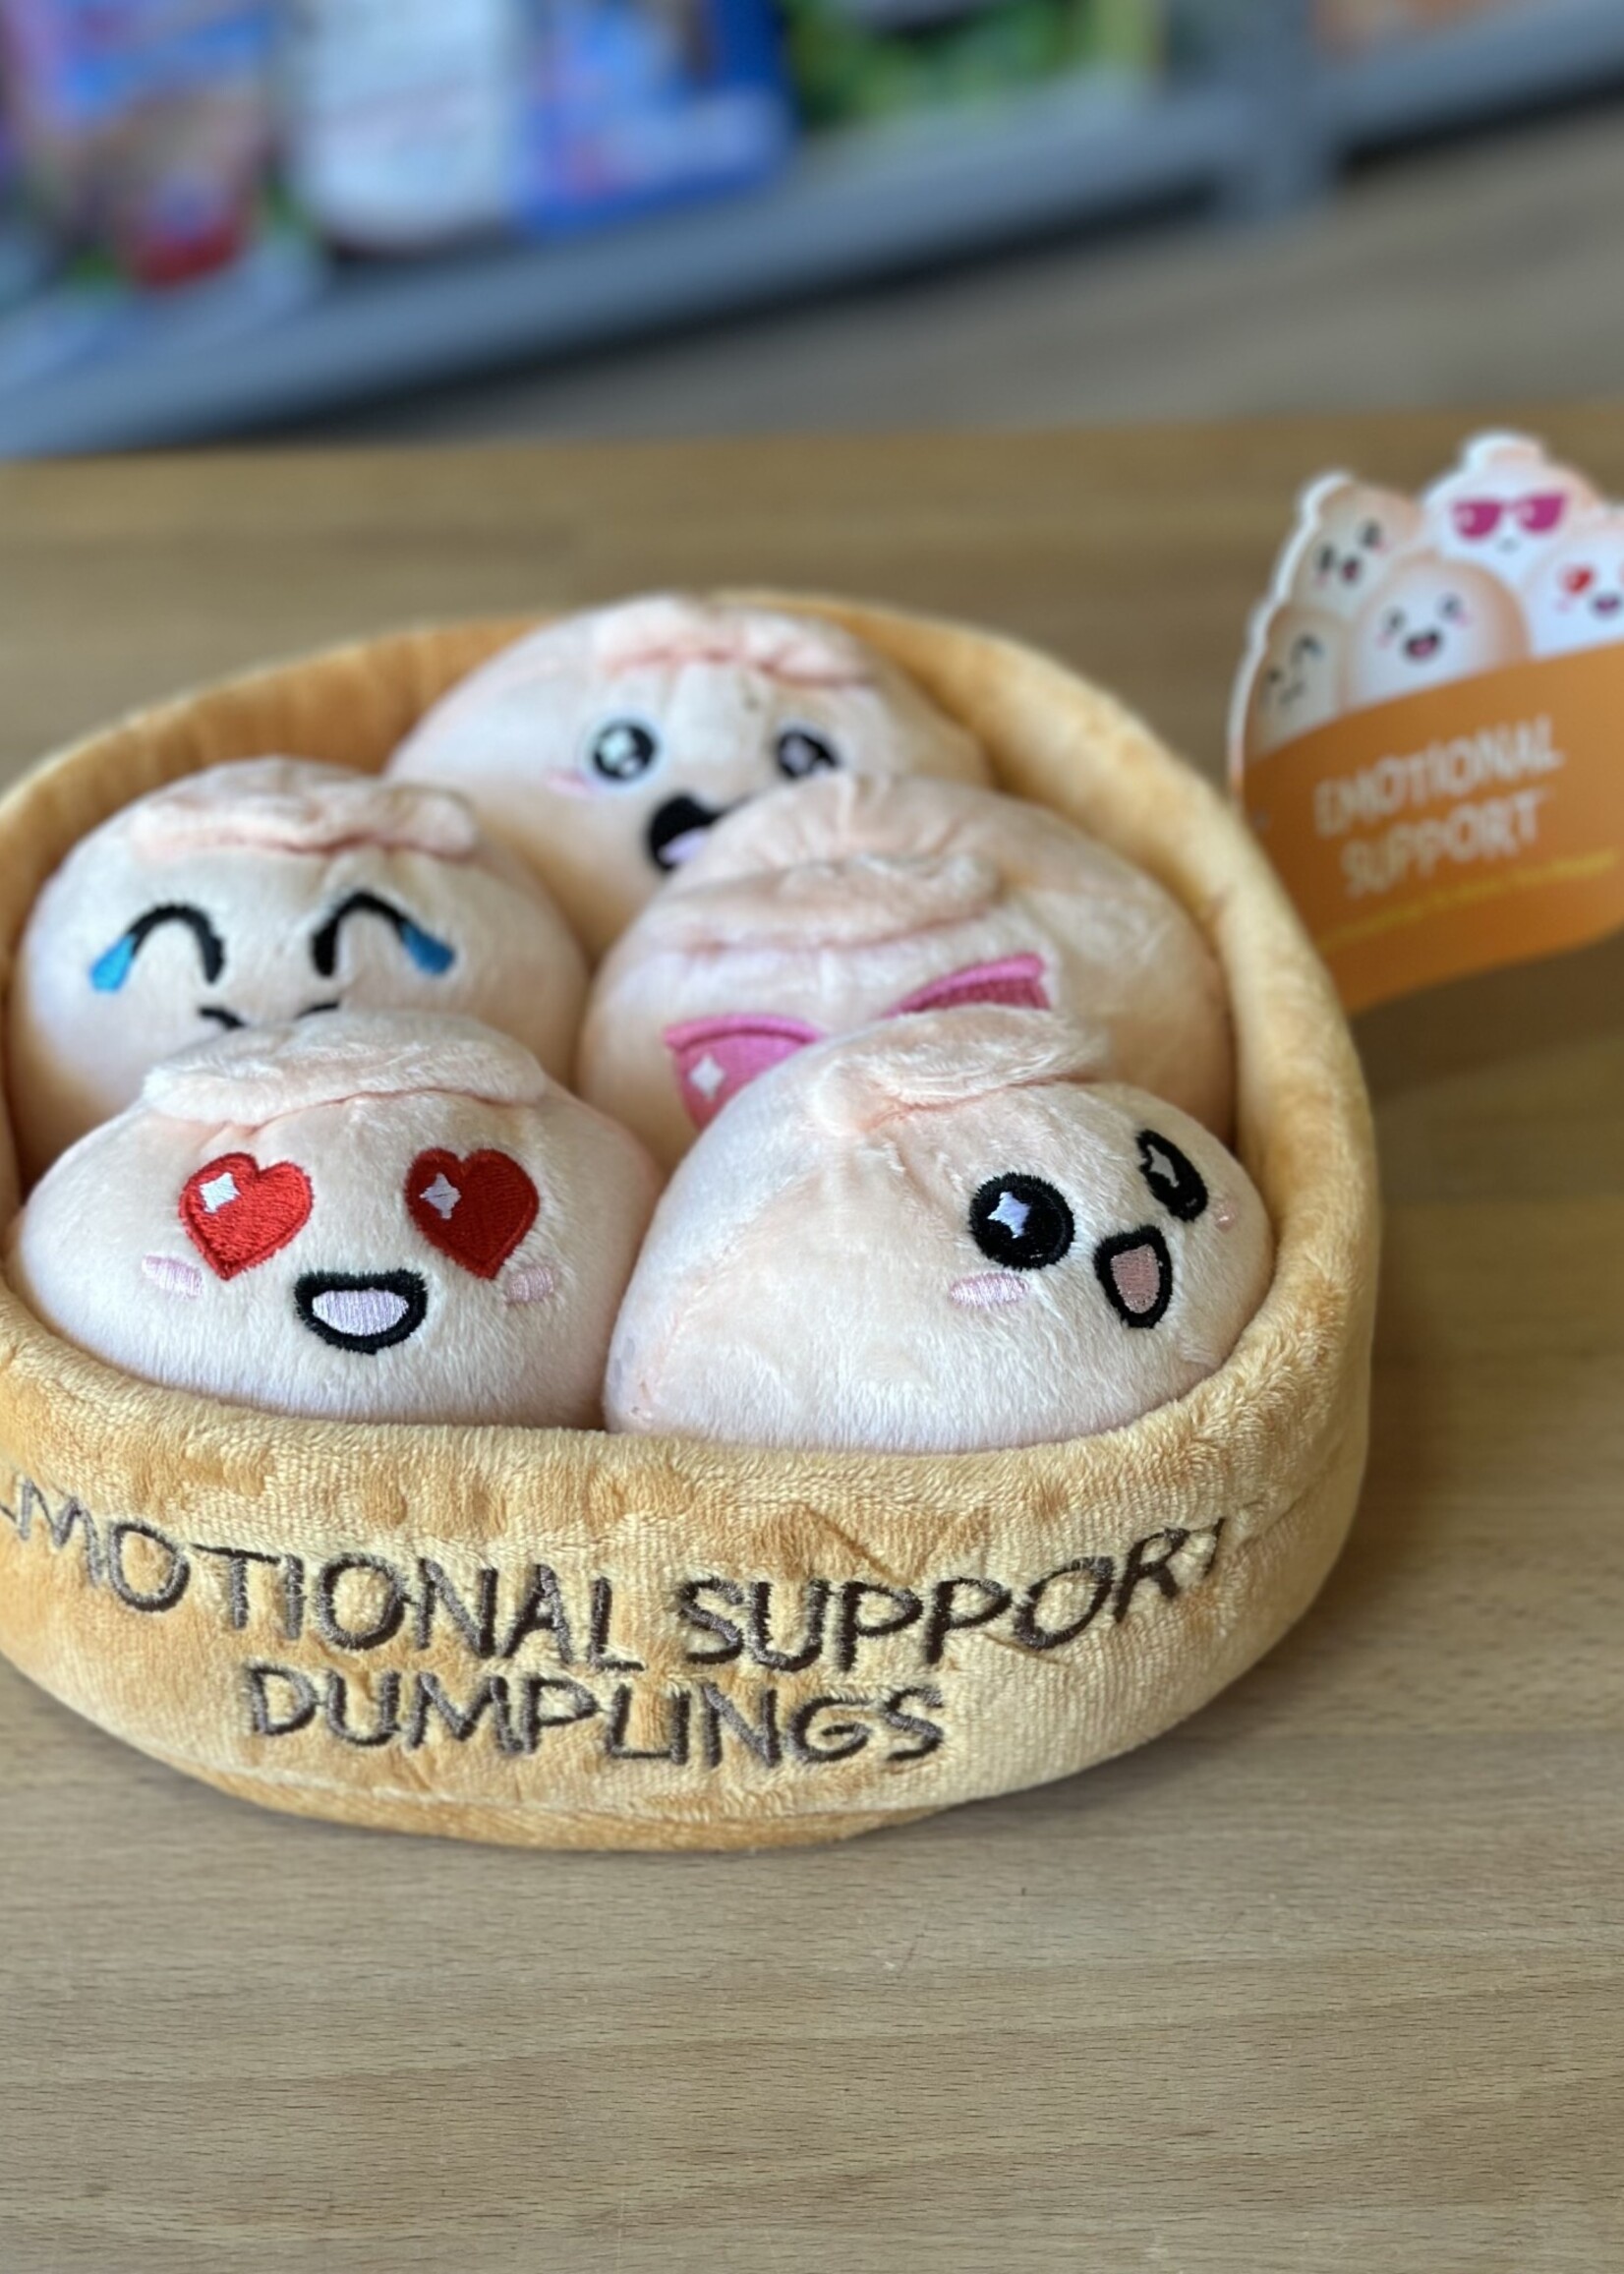 🍱🥟🫶🏼Emotional support dumpling🫶🏼🥟🍱 here to tell you that